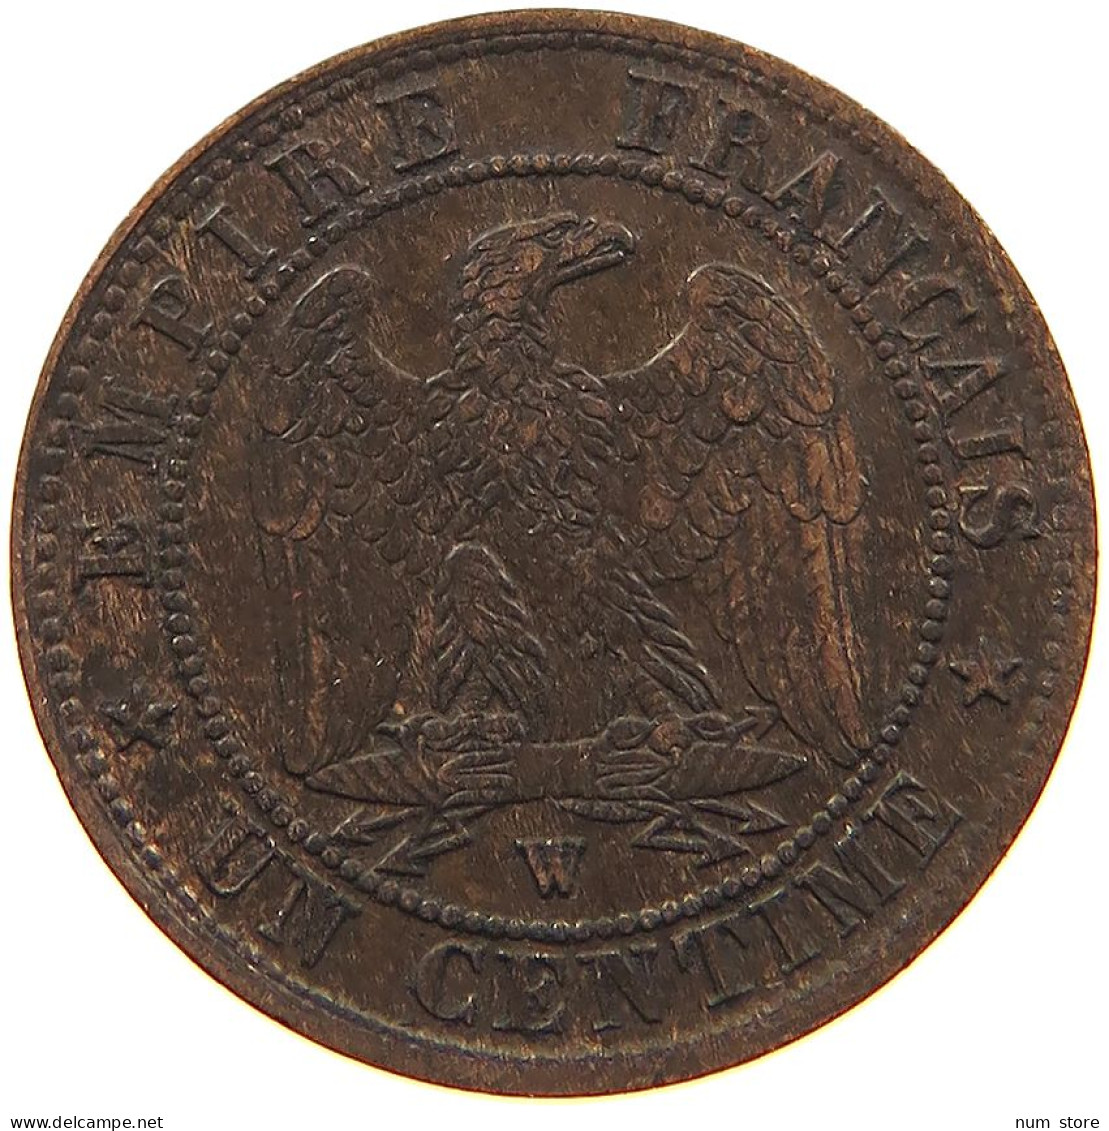 FRANCE 1 CENTIME 1853 W #s081 0297 - 1 Centime